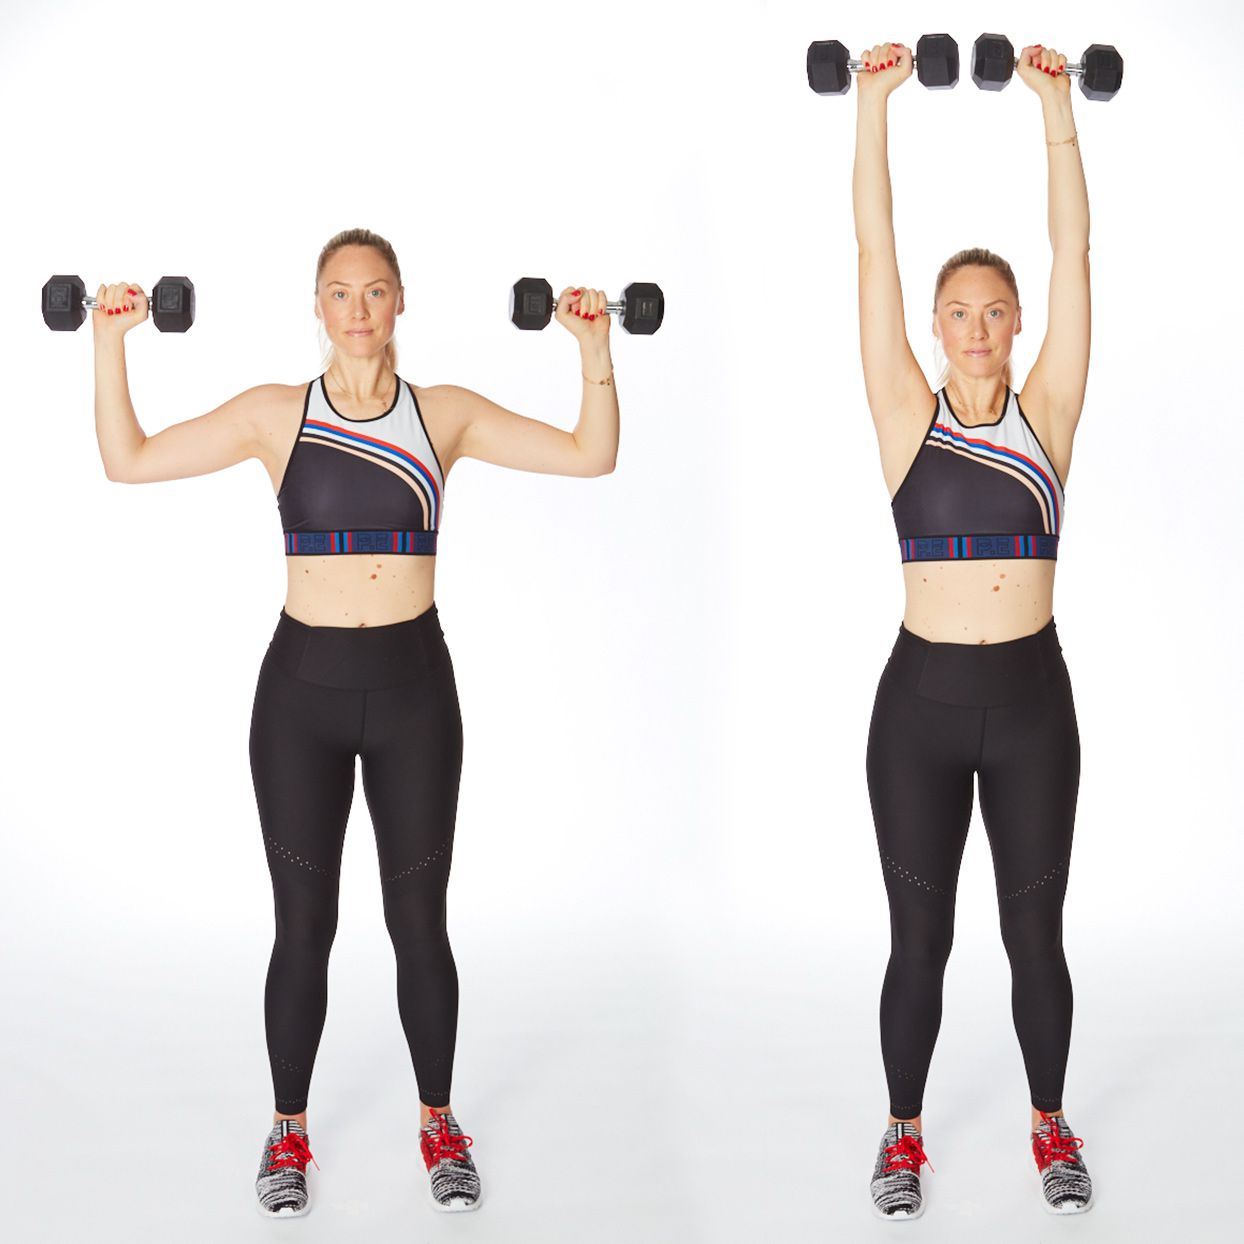 5-Minute Arm Workout with Dumbbells | Shape